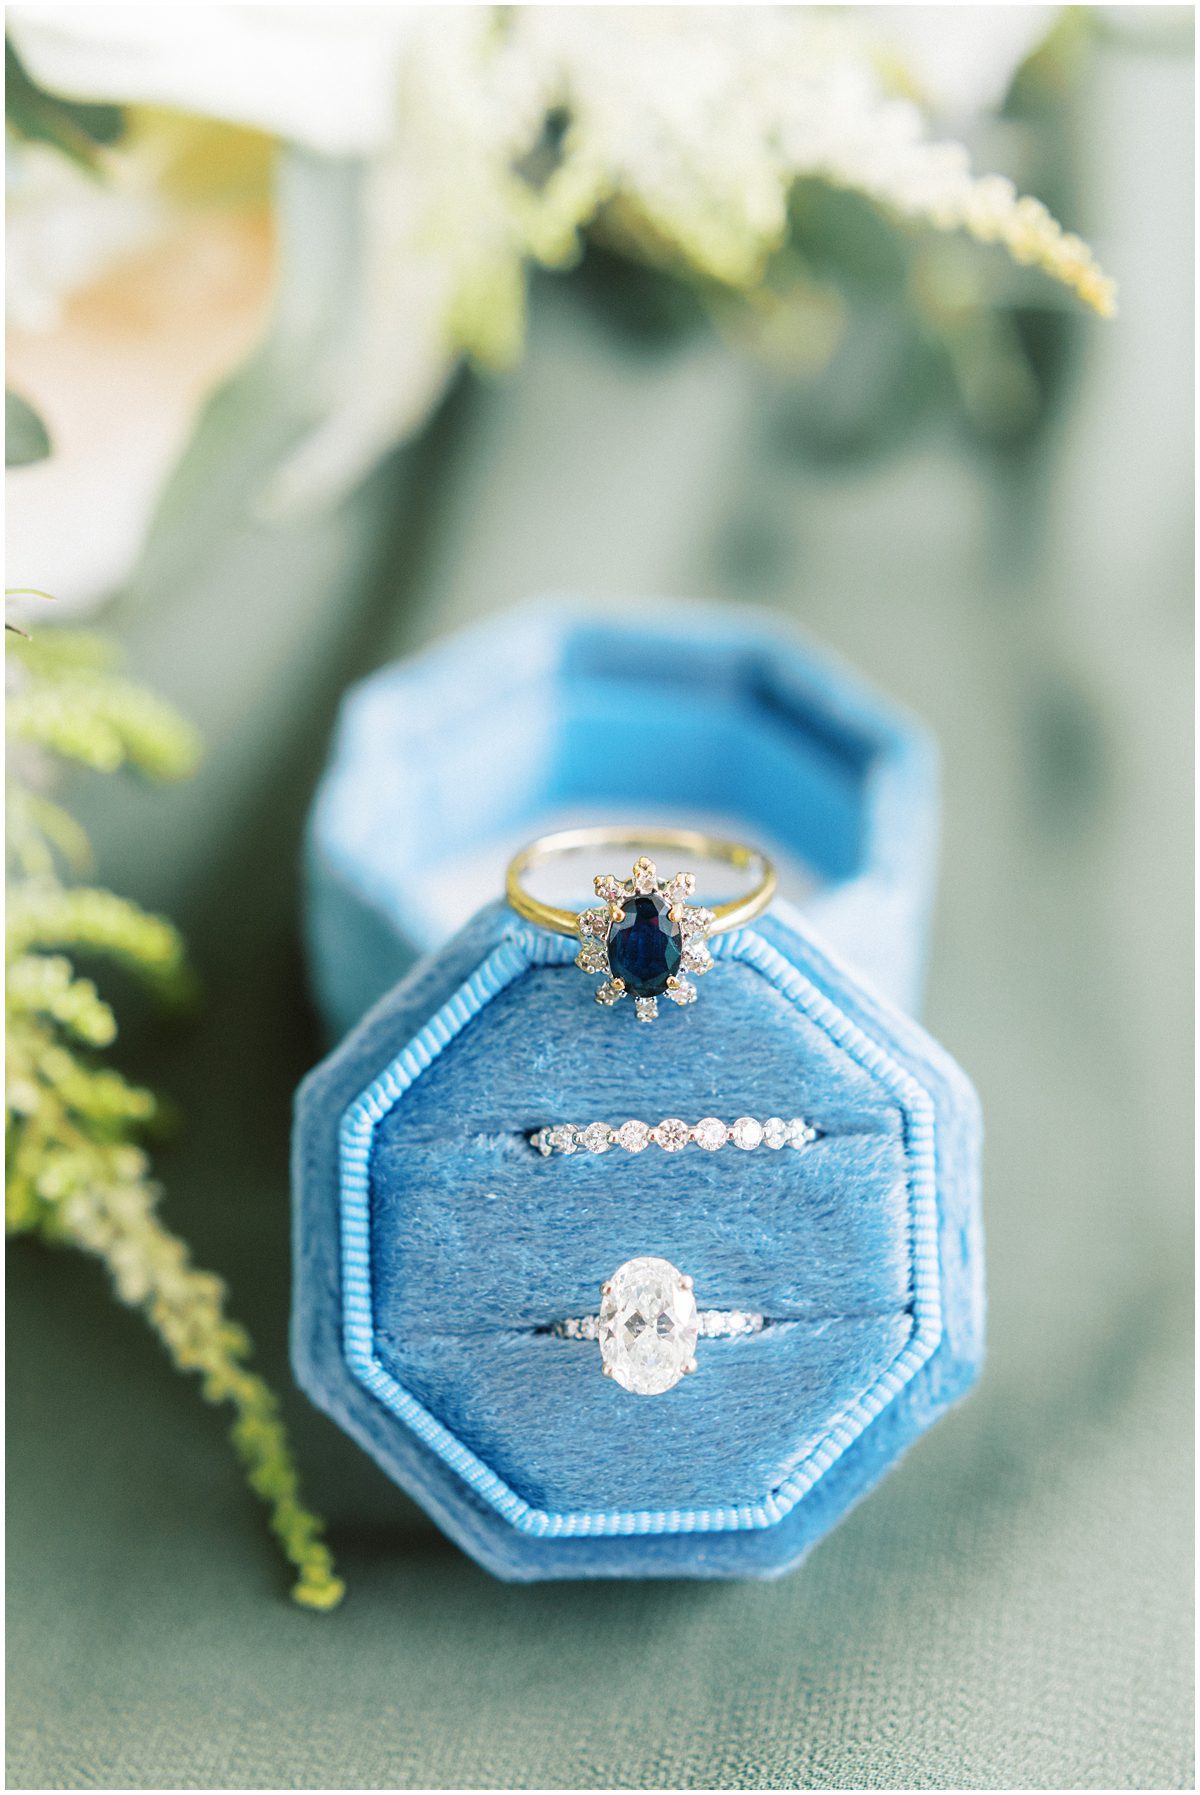 brides wedding rings in a blue mrs box